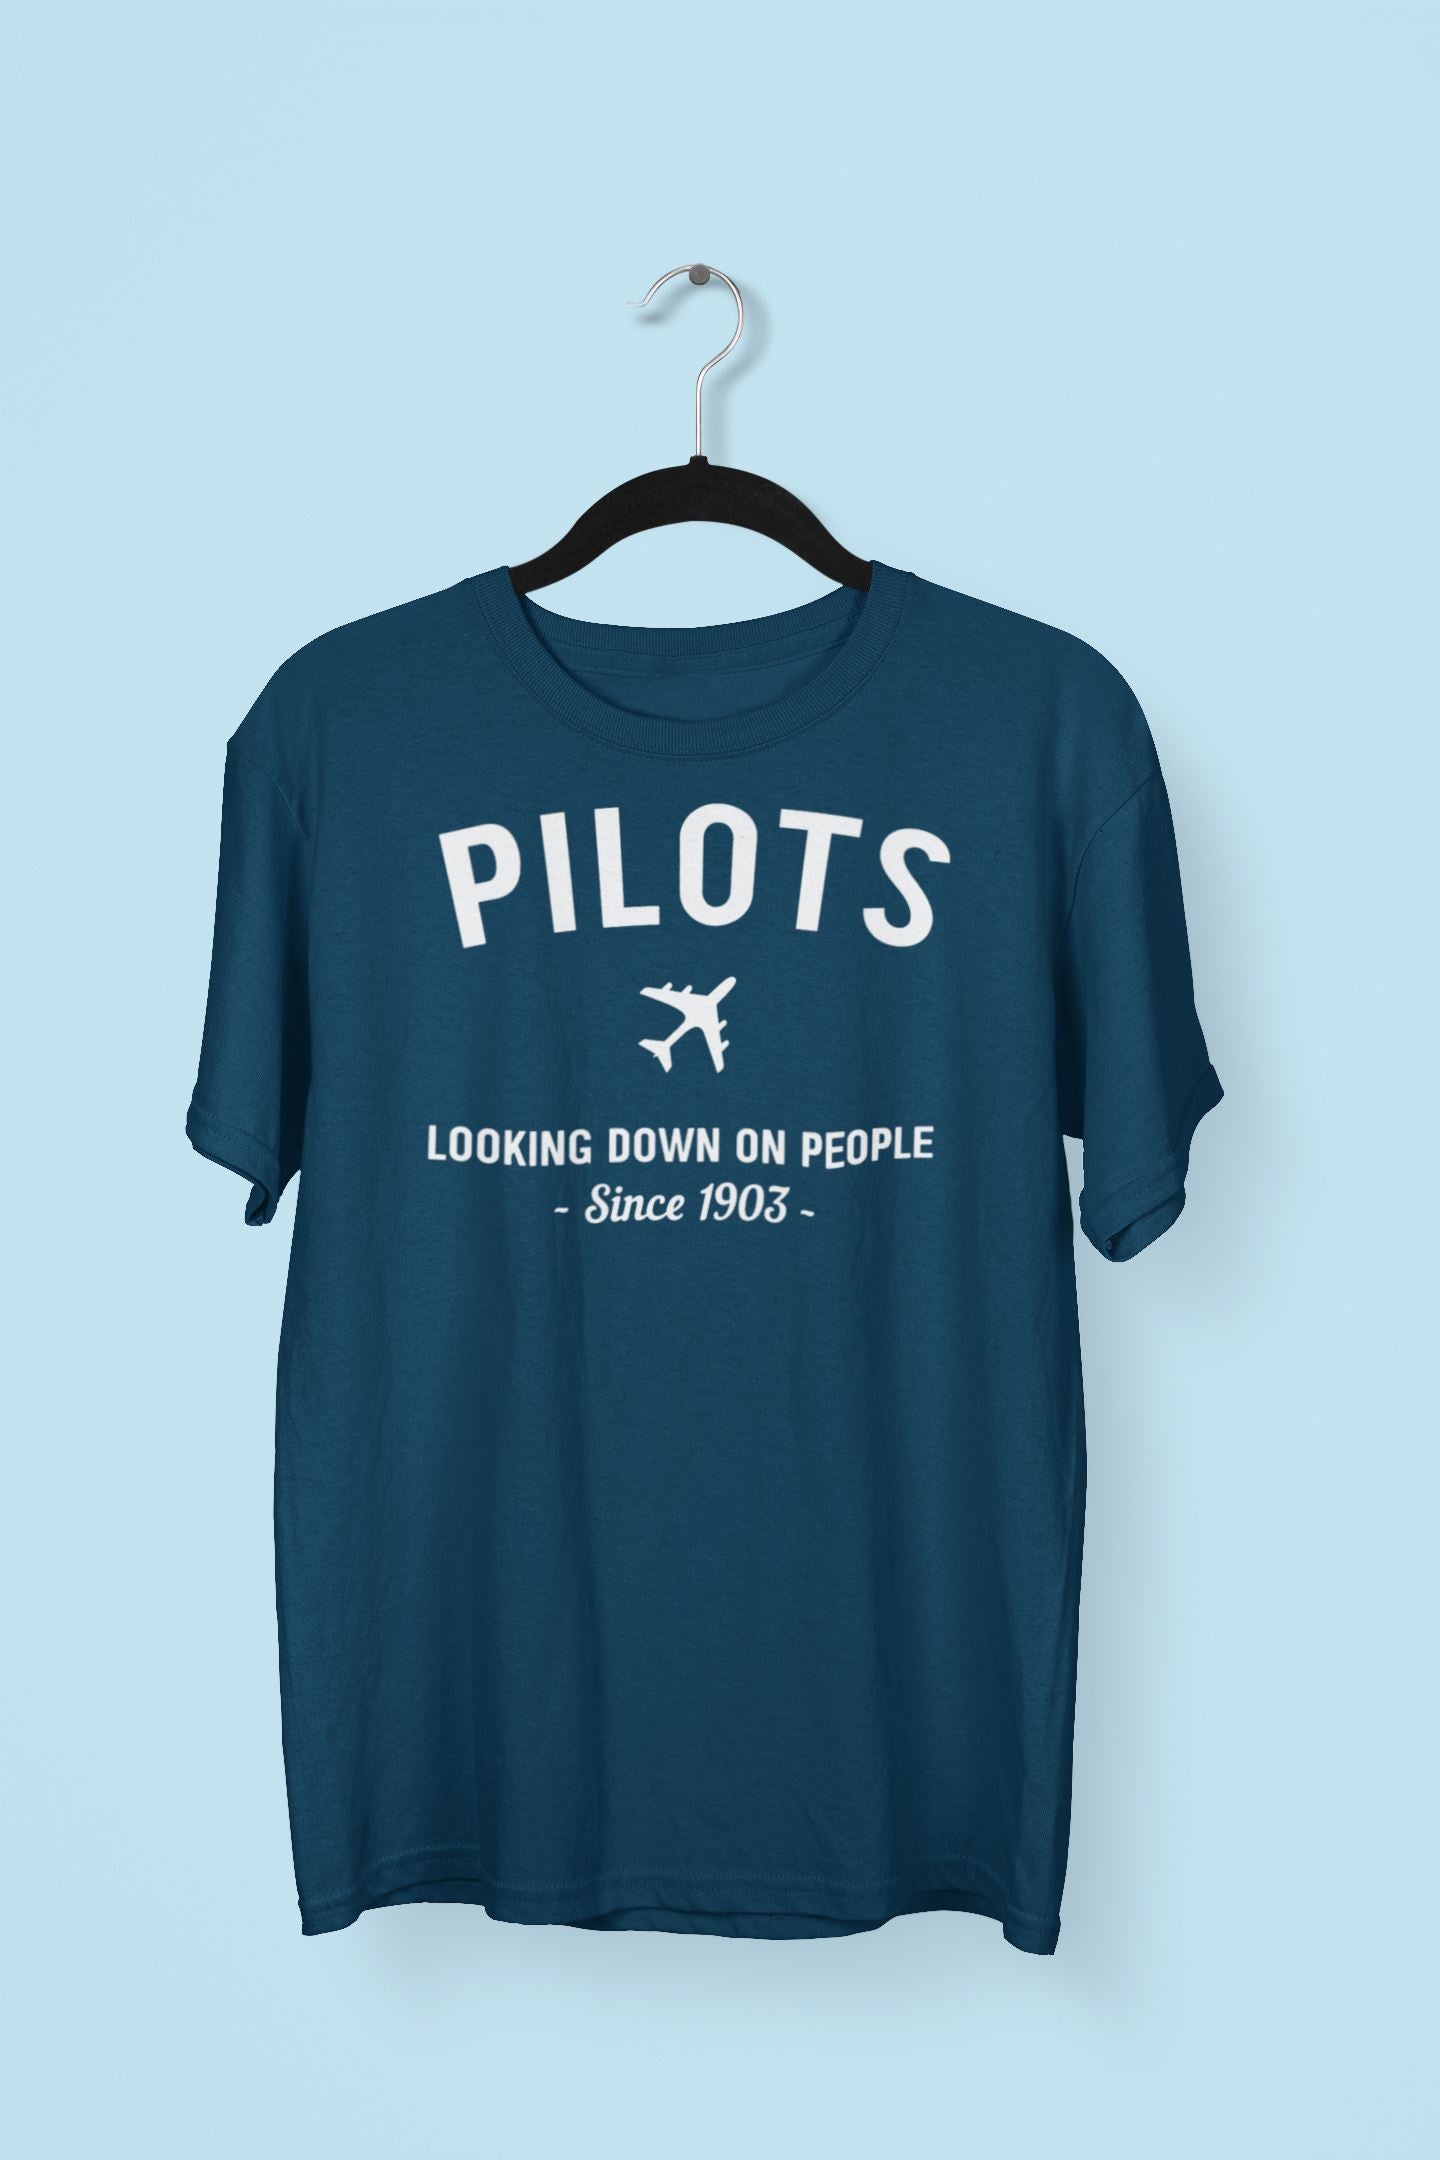 Pilots Looking Down on People Since 1903 Exclusive Navy Blue T Shirt for Men and Women Printrove Navy Blue S 